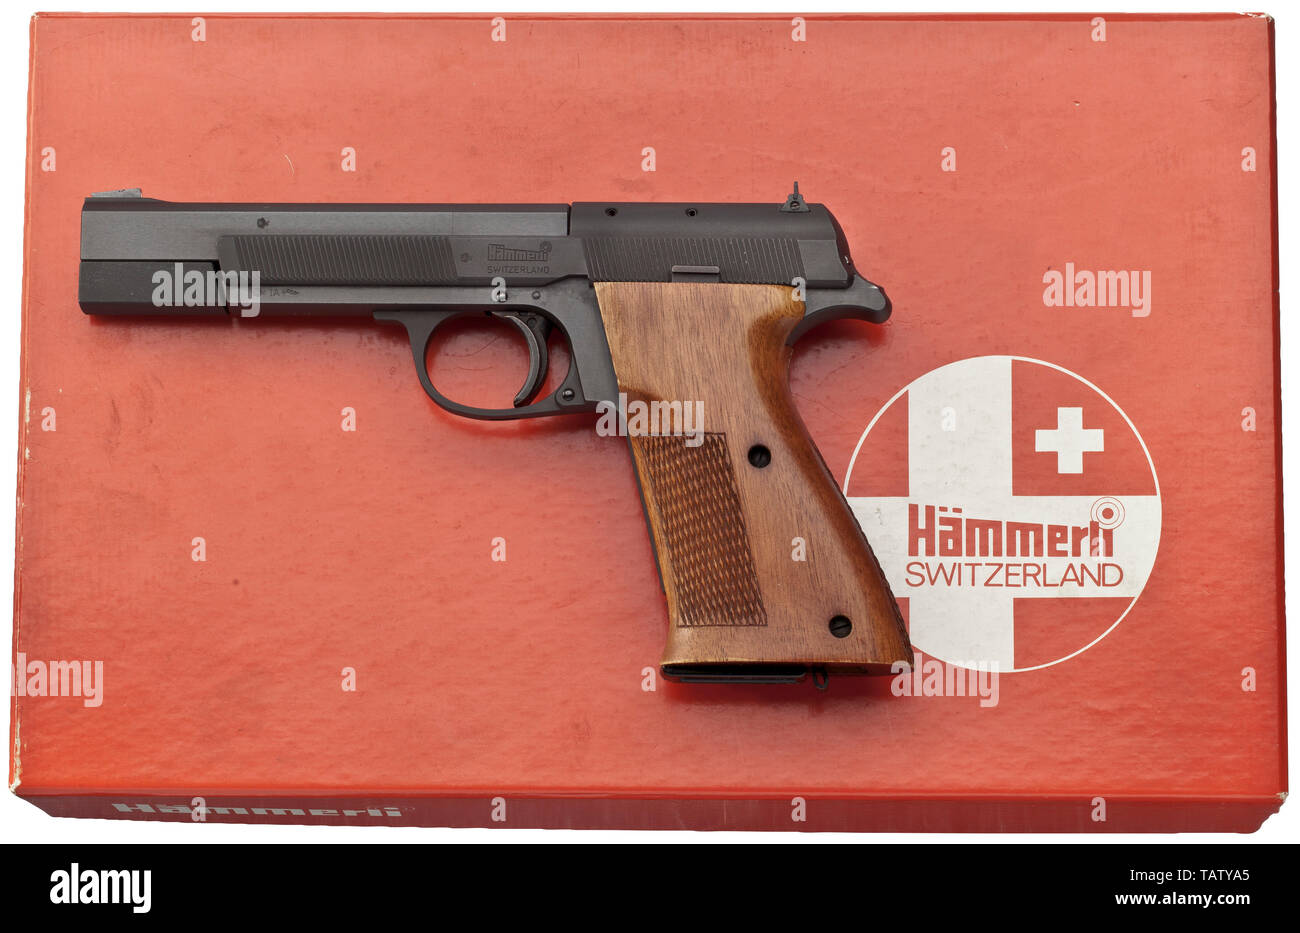 Shooting sports, pistols, Switzerland, Hämmerli 212, caliber .22, Additional-Rights-Clearance-Info-Not-Available Stock Photo